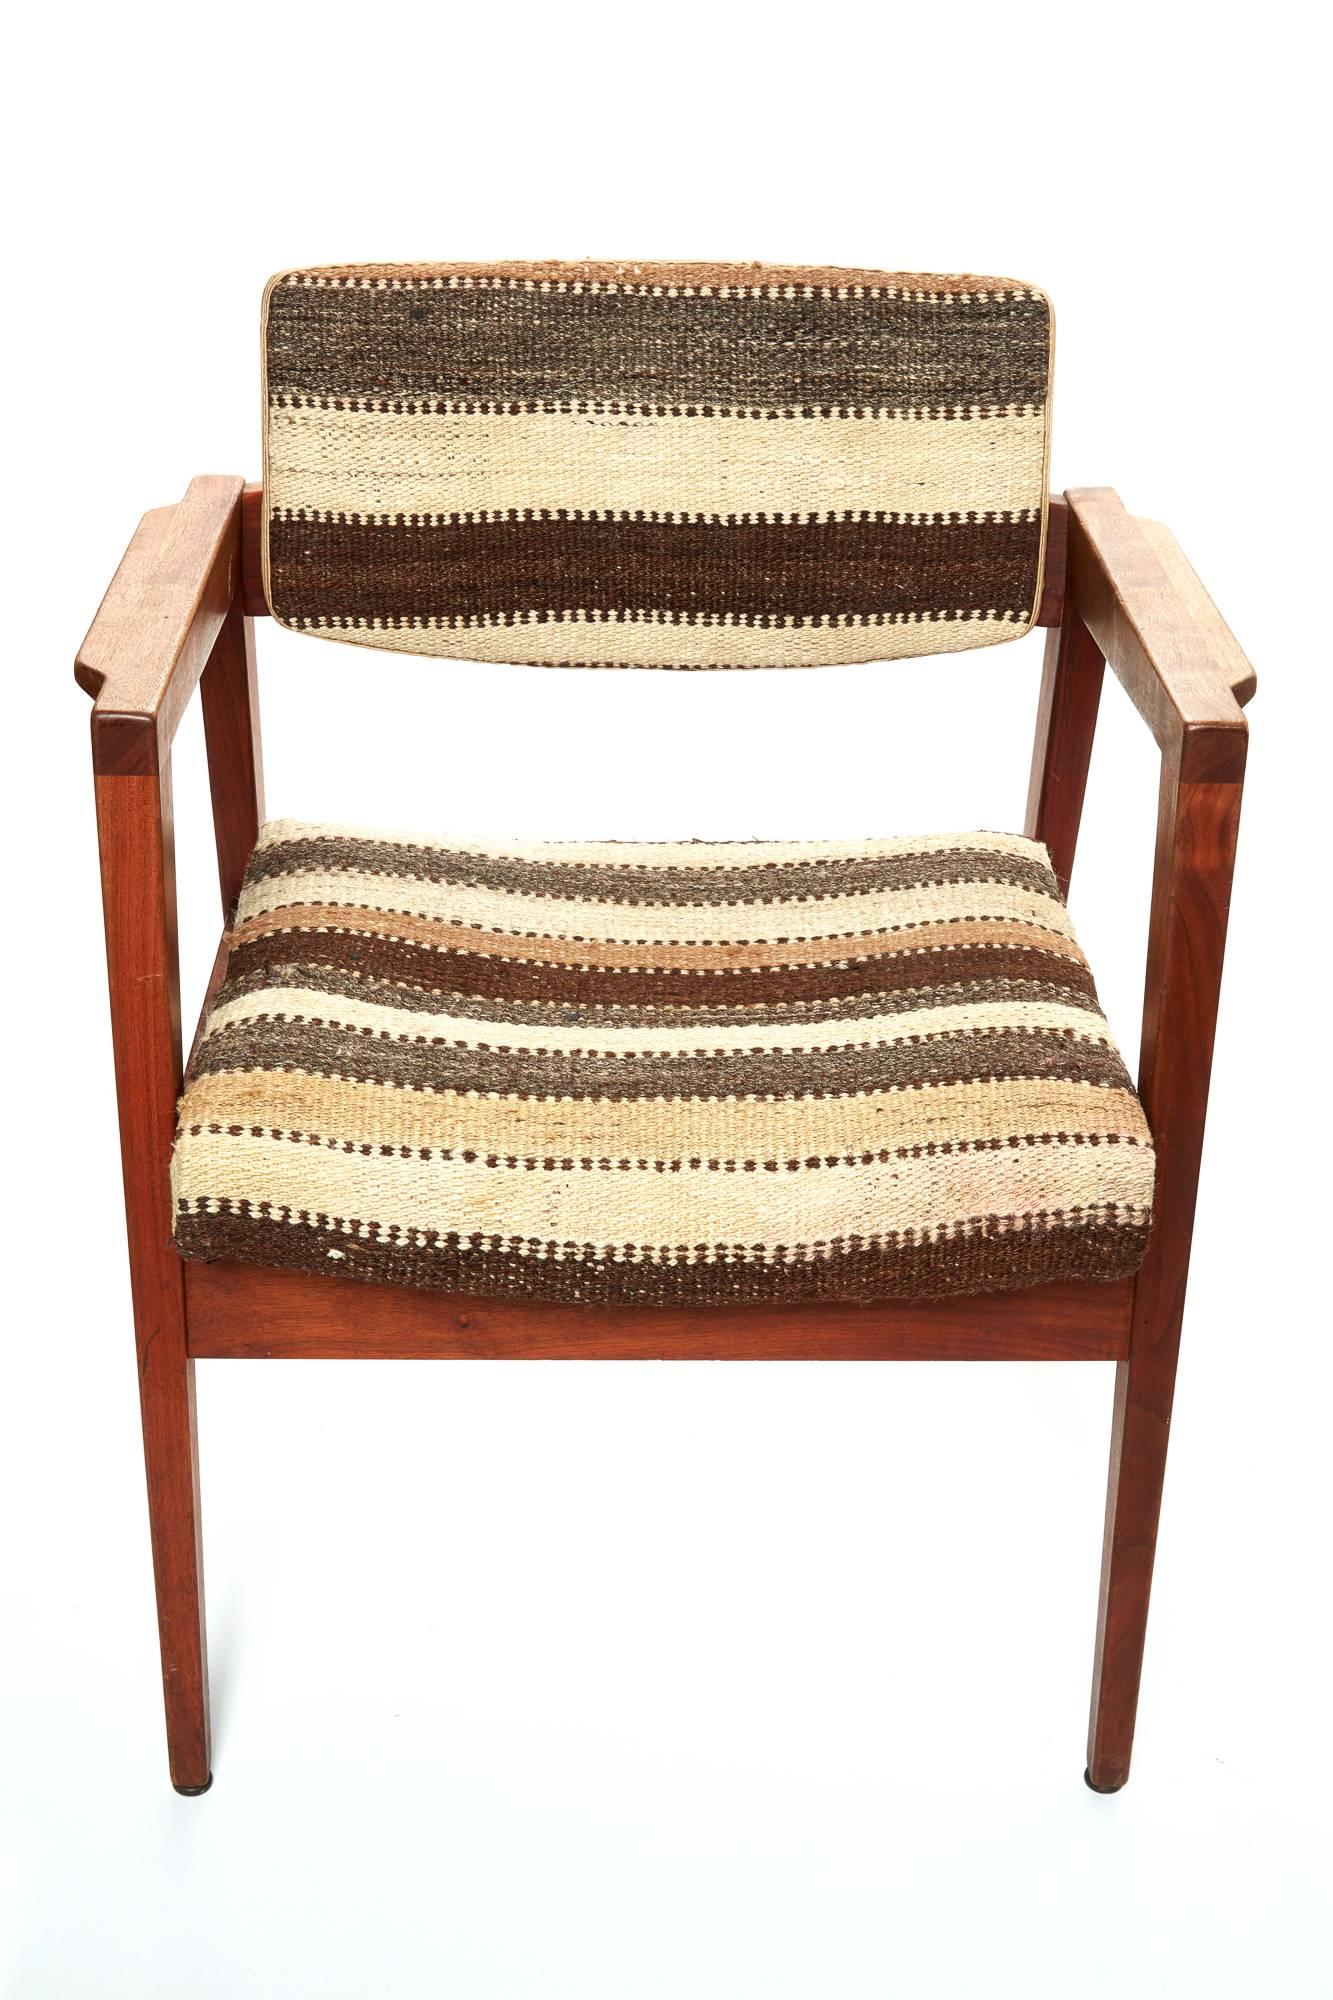 Pair of mid-20th century  Danish armchairs. 
Covered in vintage African Berber rug. 
Structure is very stabile and chairs have been restored and reupholstered.